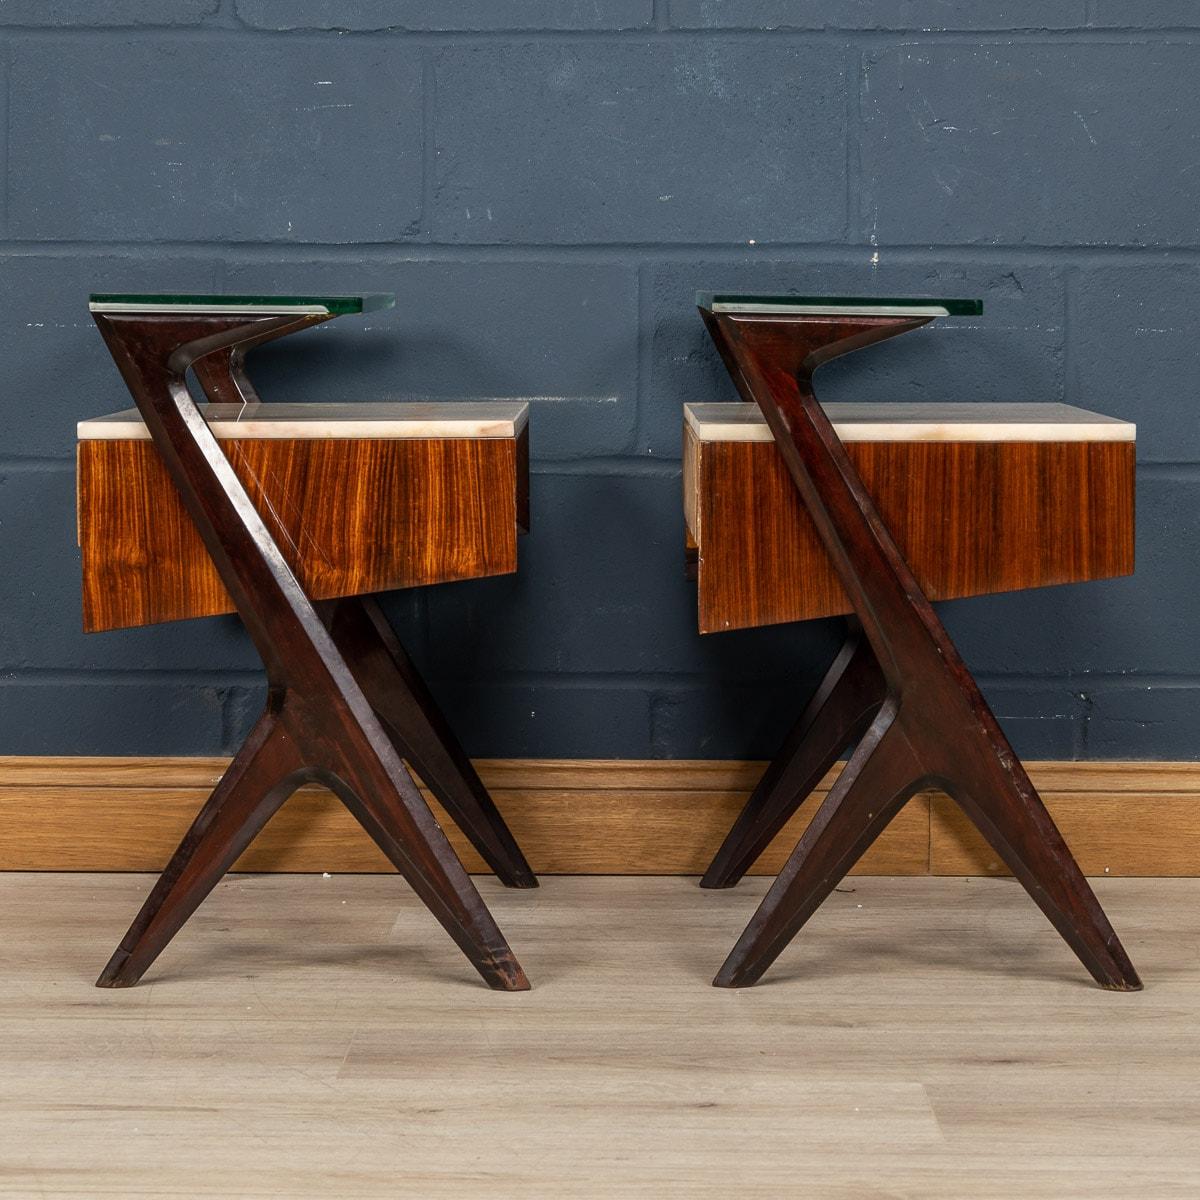 A Pair Of Italian Rosewood Side Tables By Vittorio Dassi, c.1950 For Sale 2